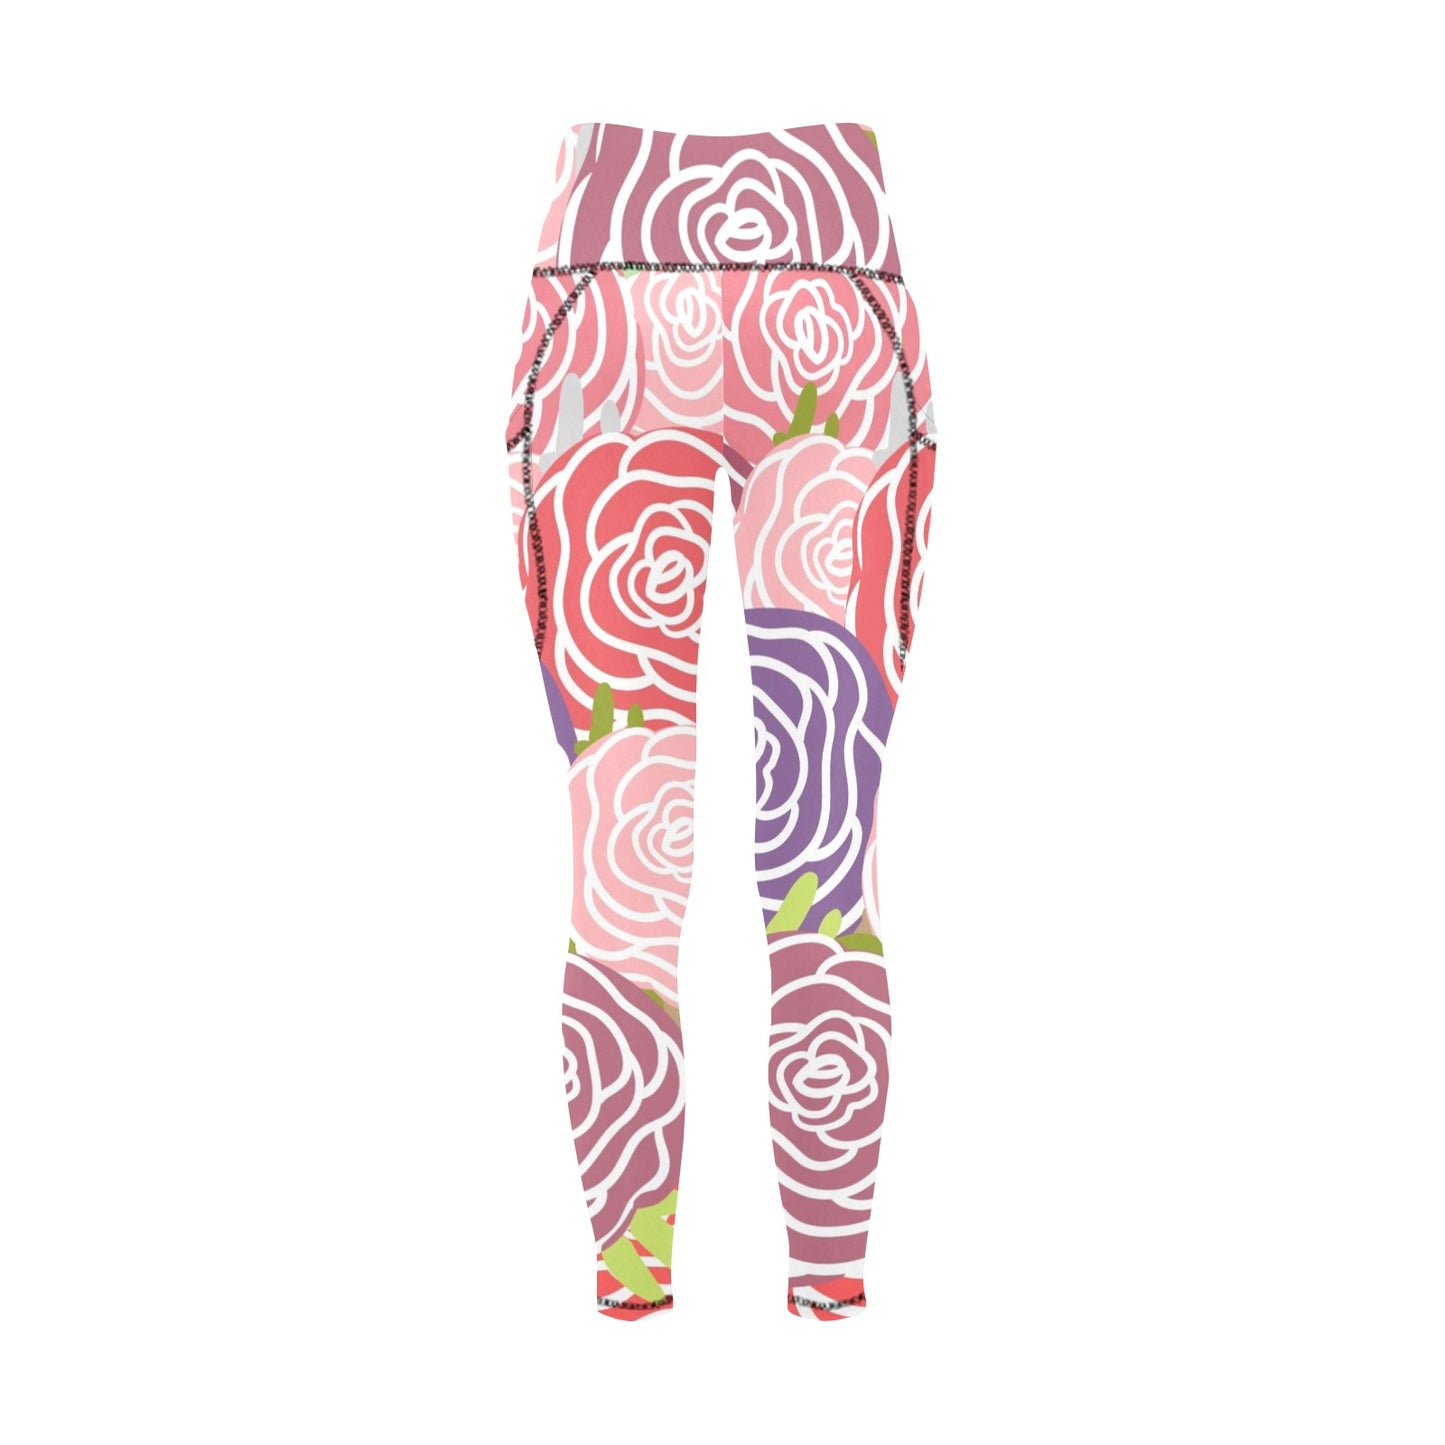 Abstract Roses - Women's Leggings with Pockets Women's Leggings with Pockets S - 2XL Plants